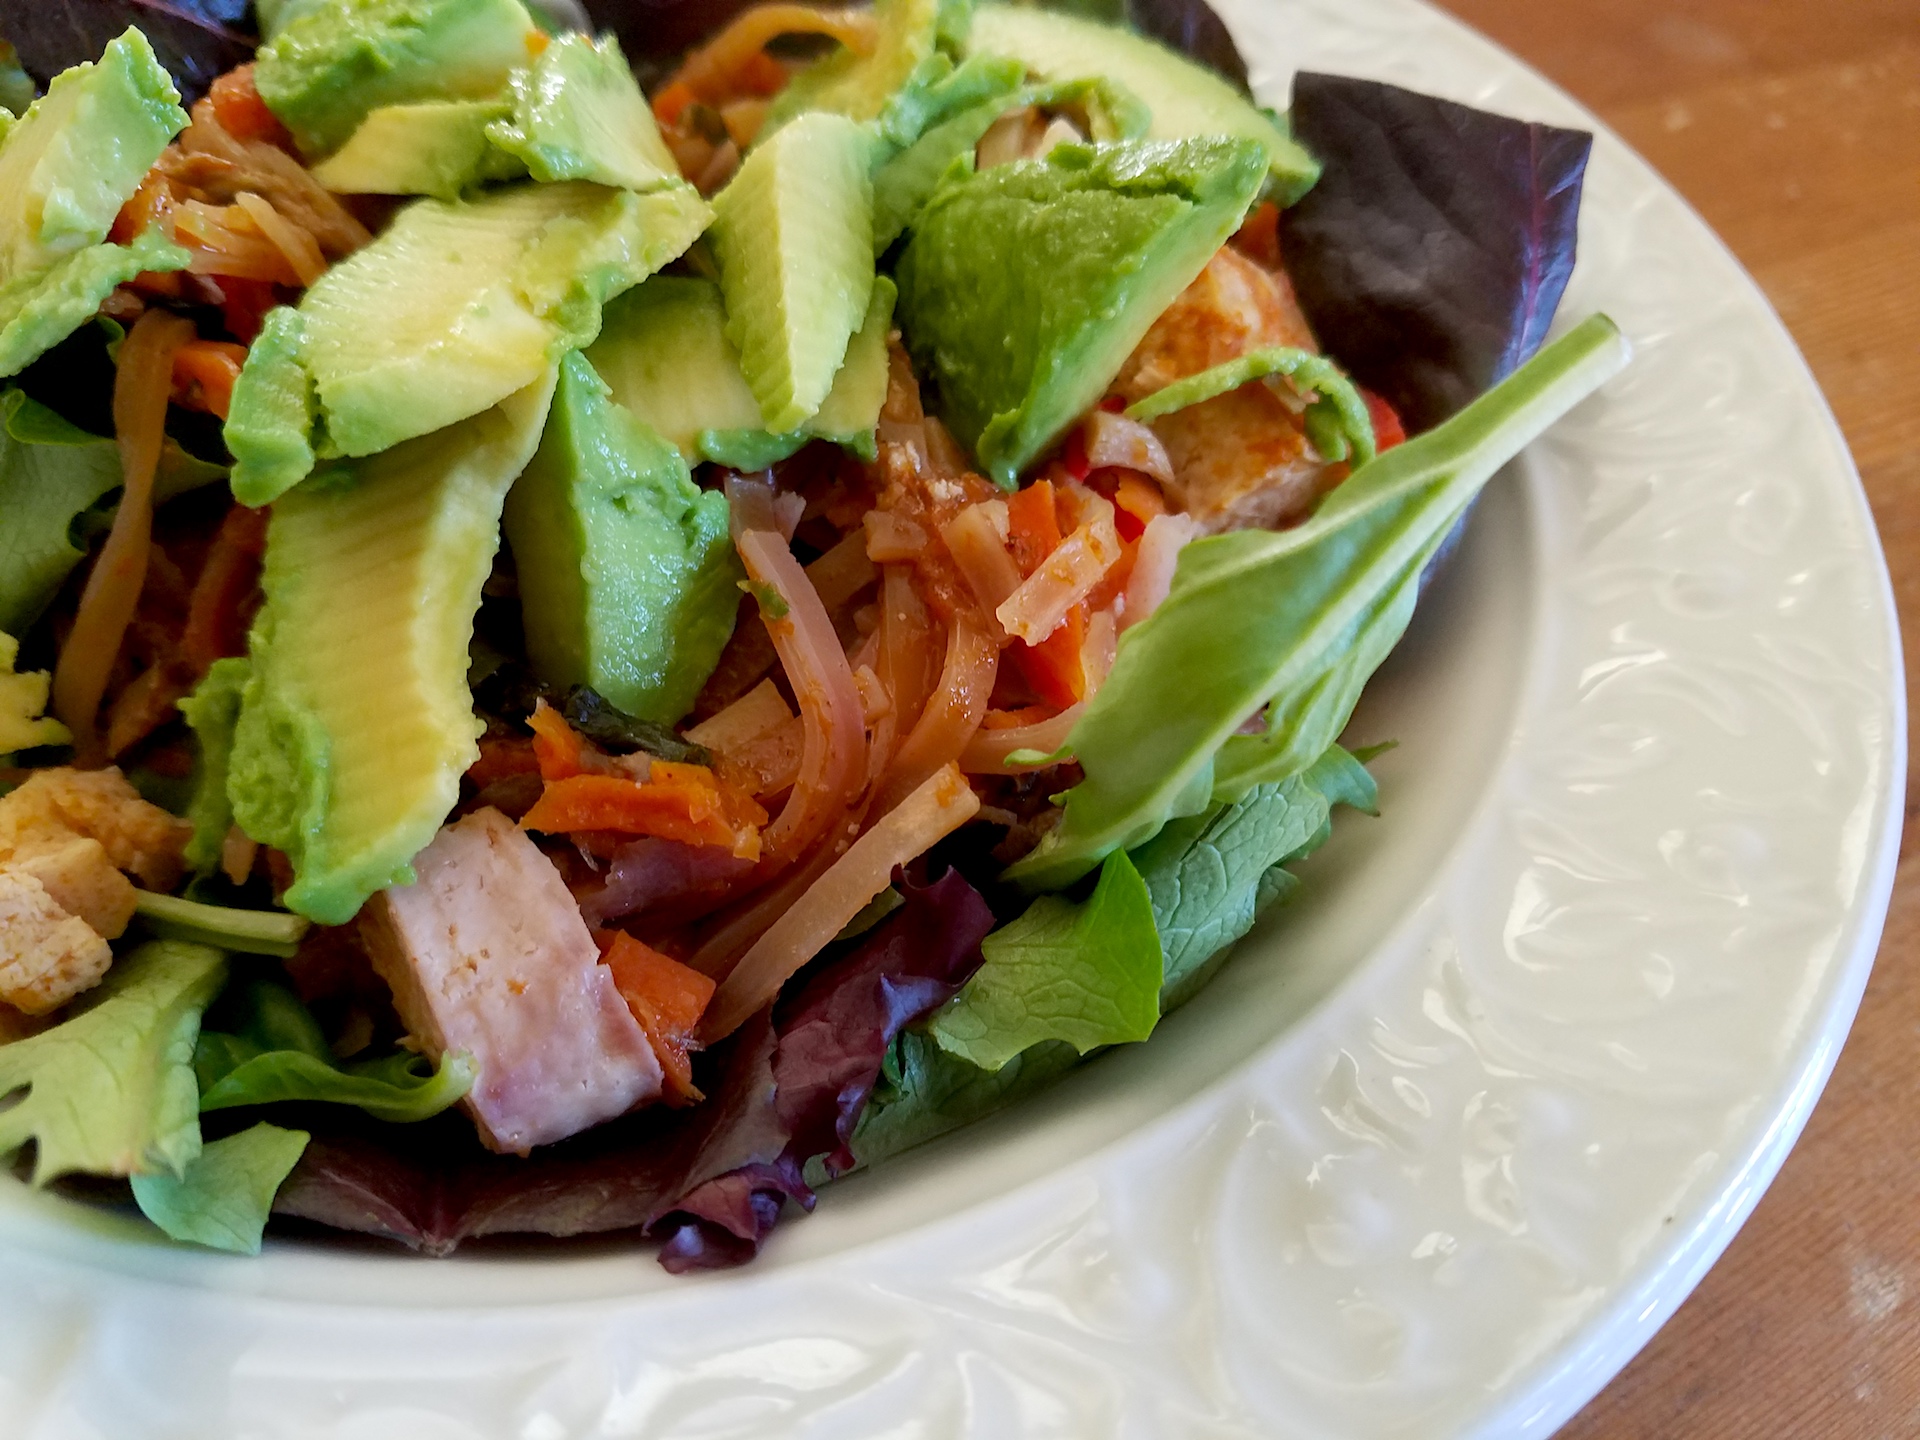 Pad thai in a lettuce bowl with avocado.